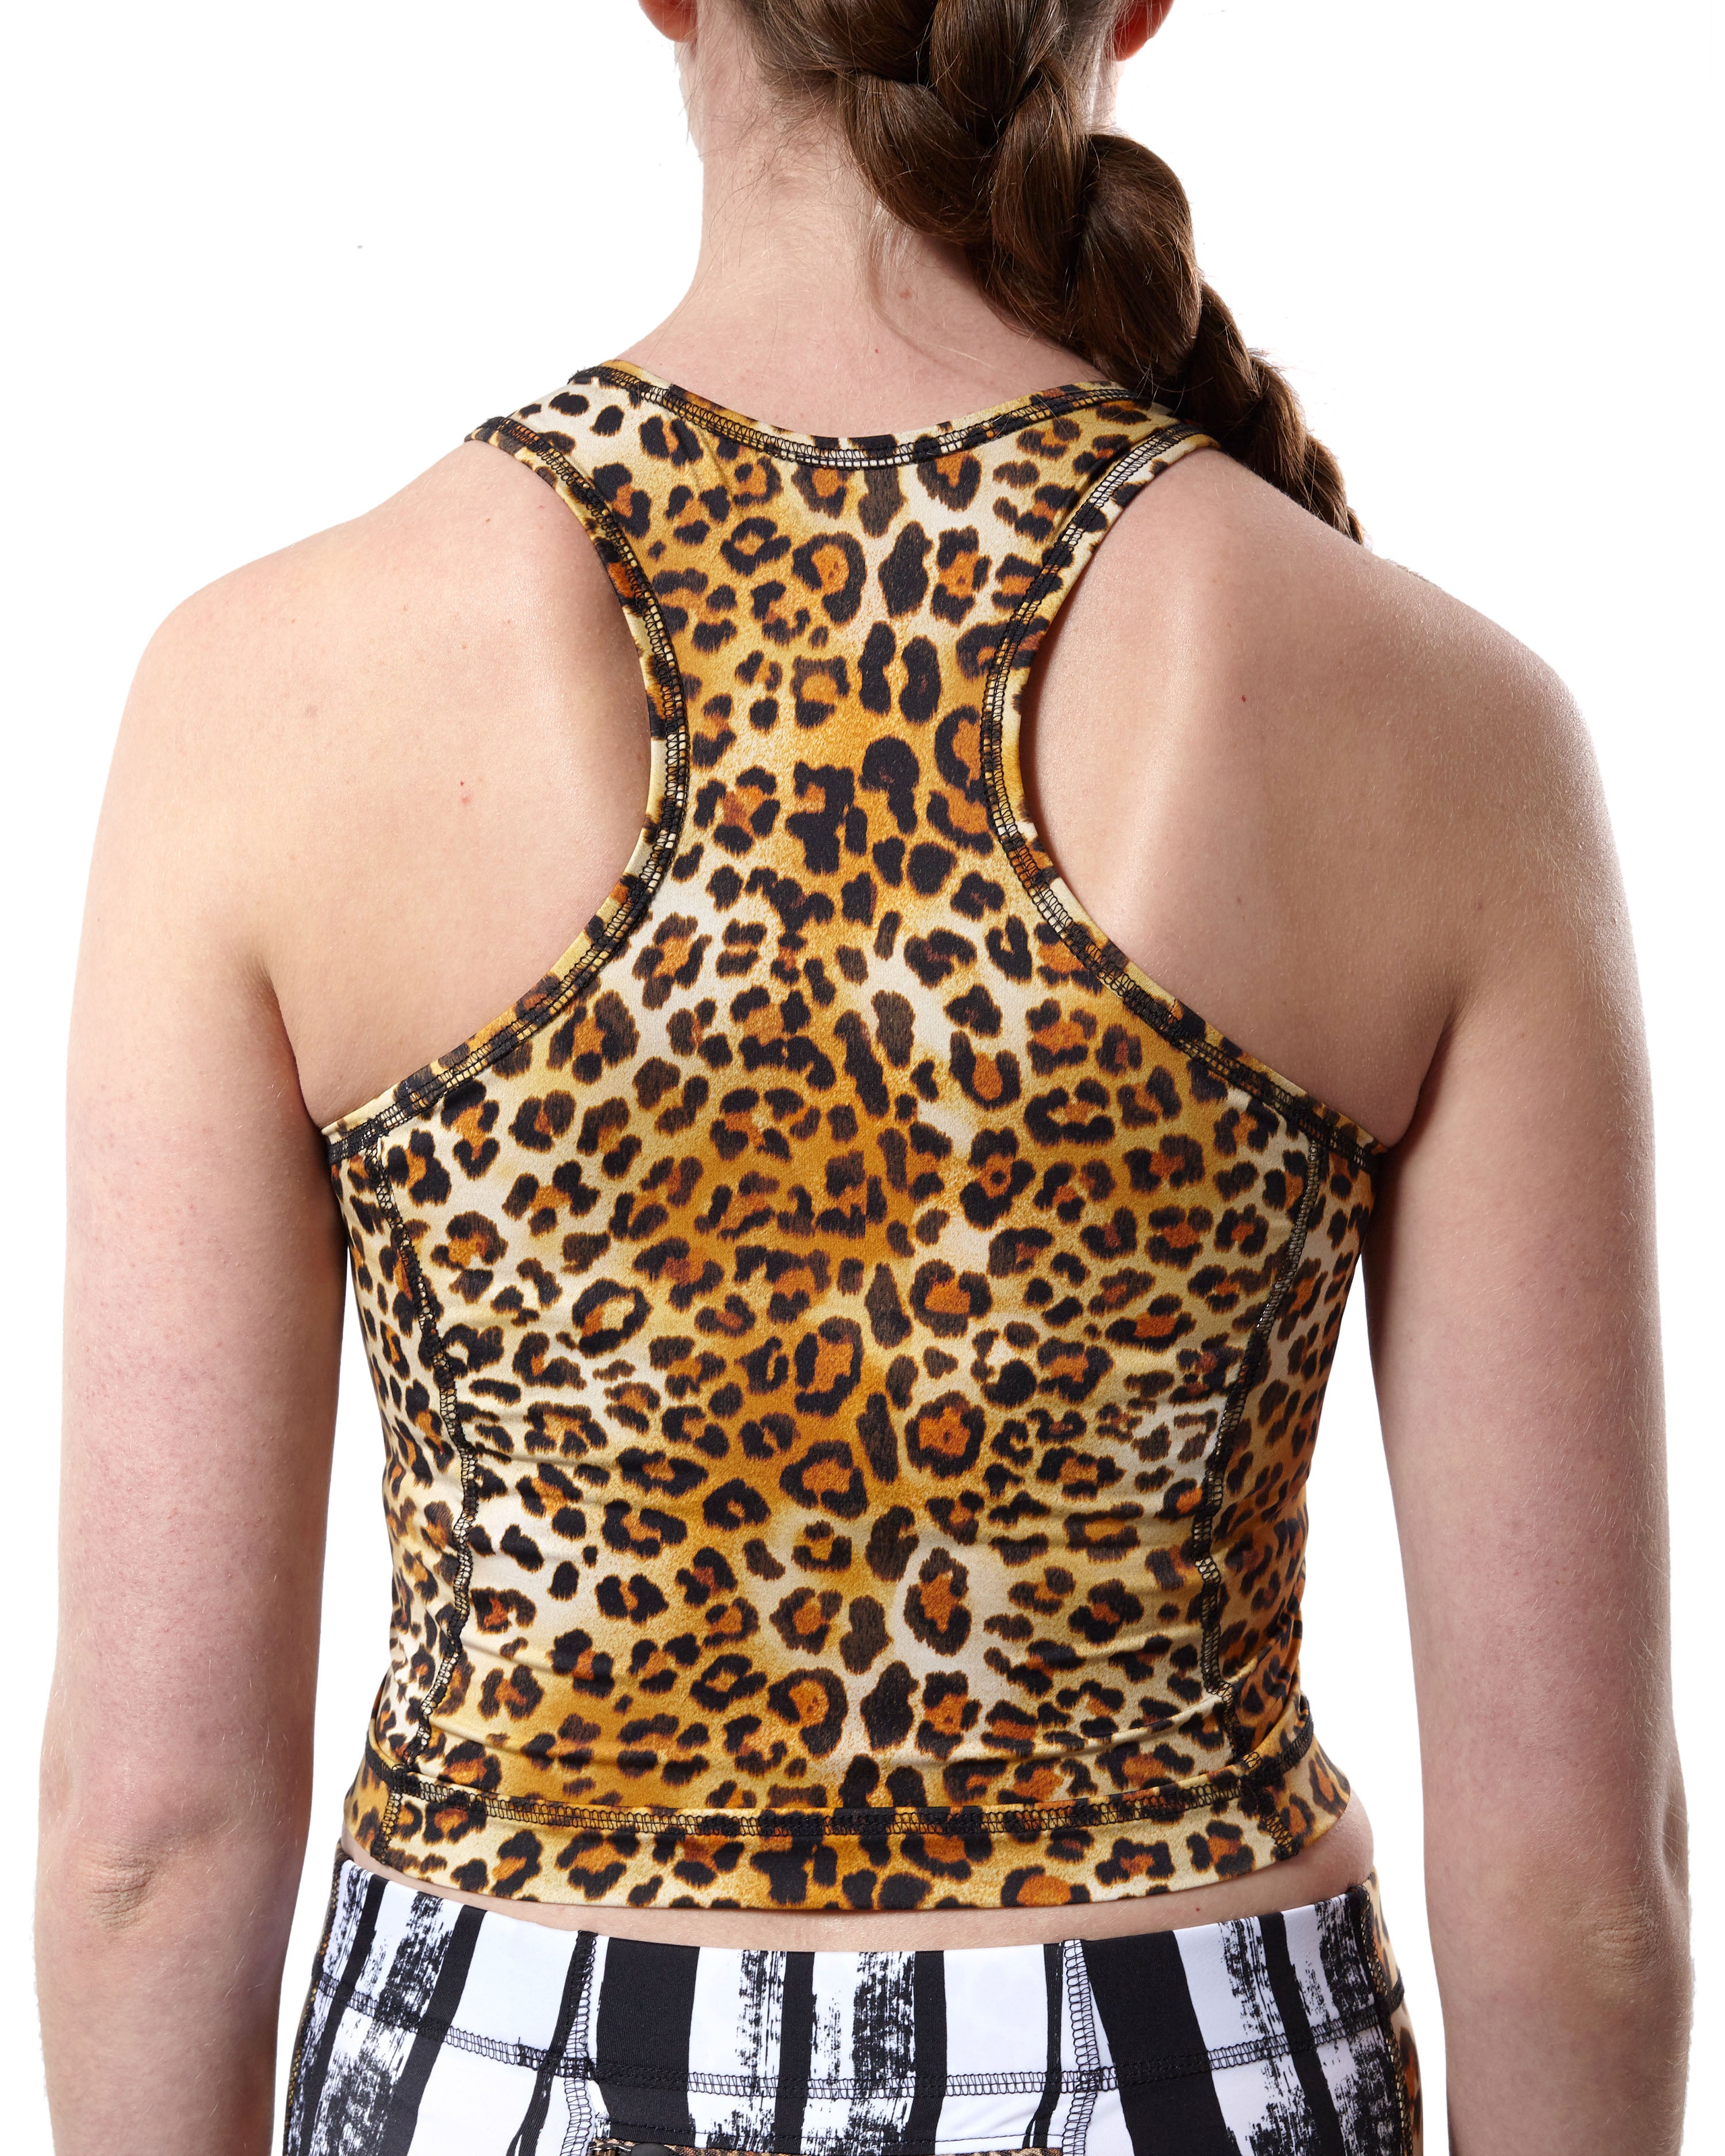 LPRD Signature Leopard Tank Top Cropped - back view